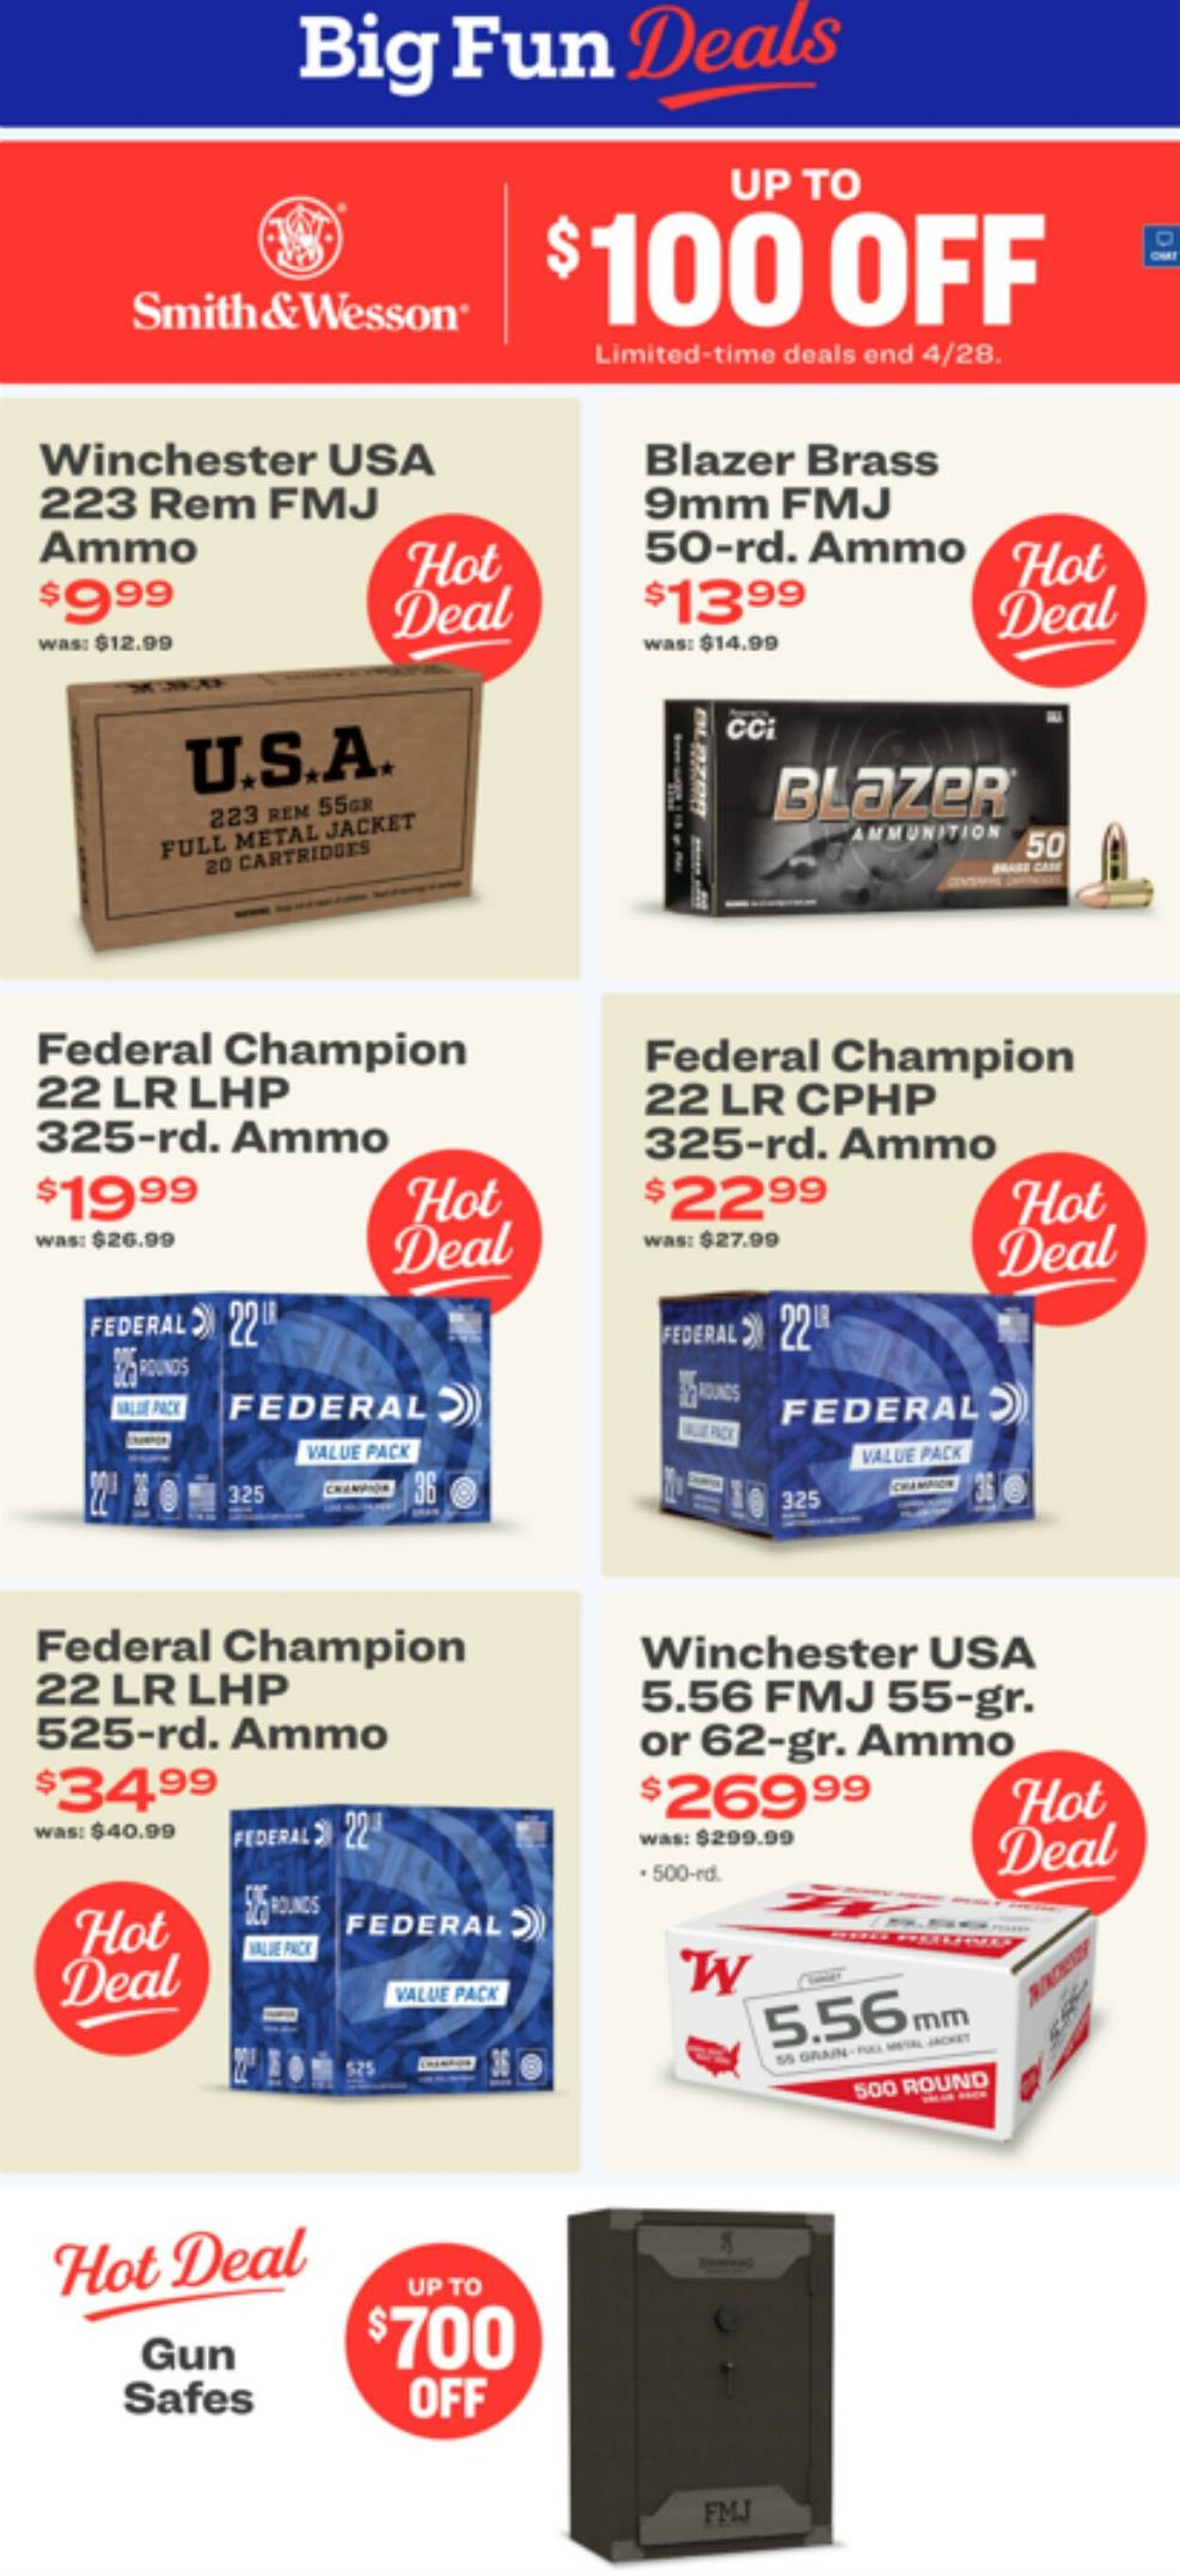 Academy Sports Promotional weekly ads